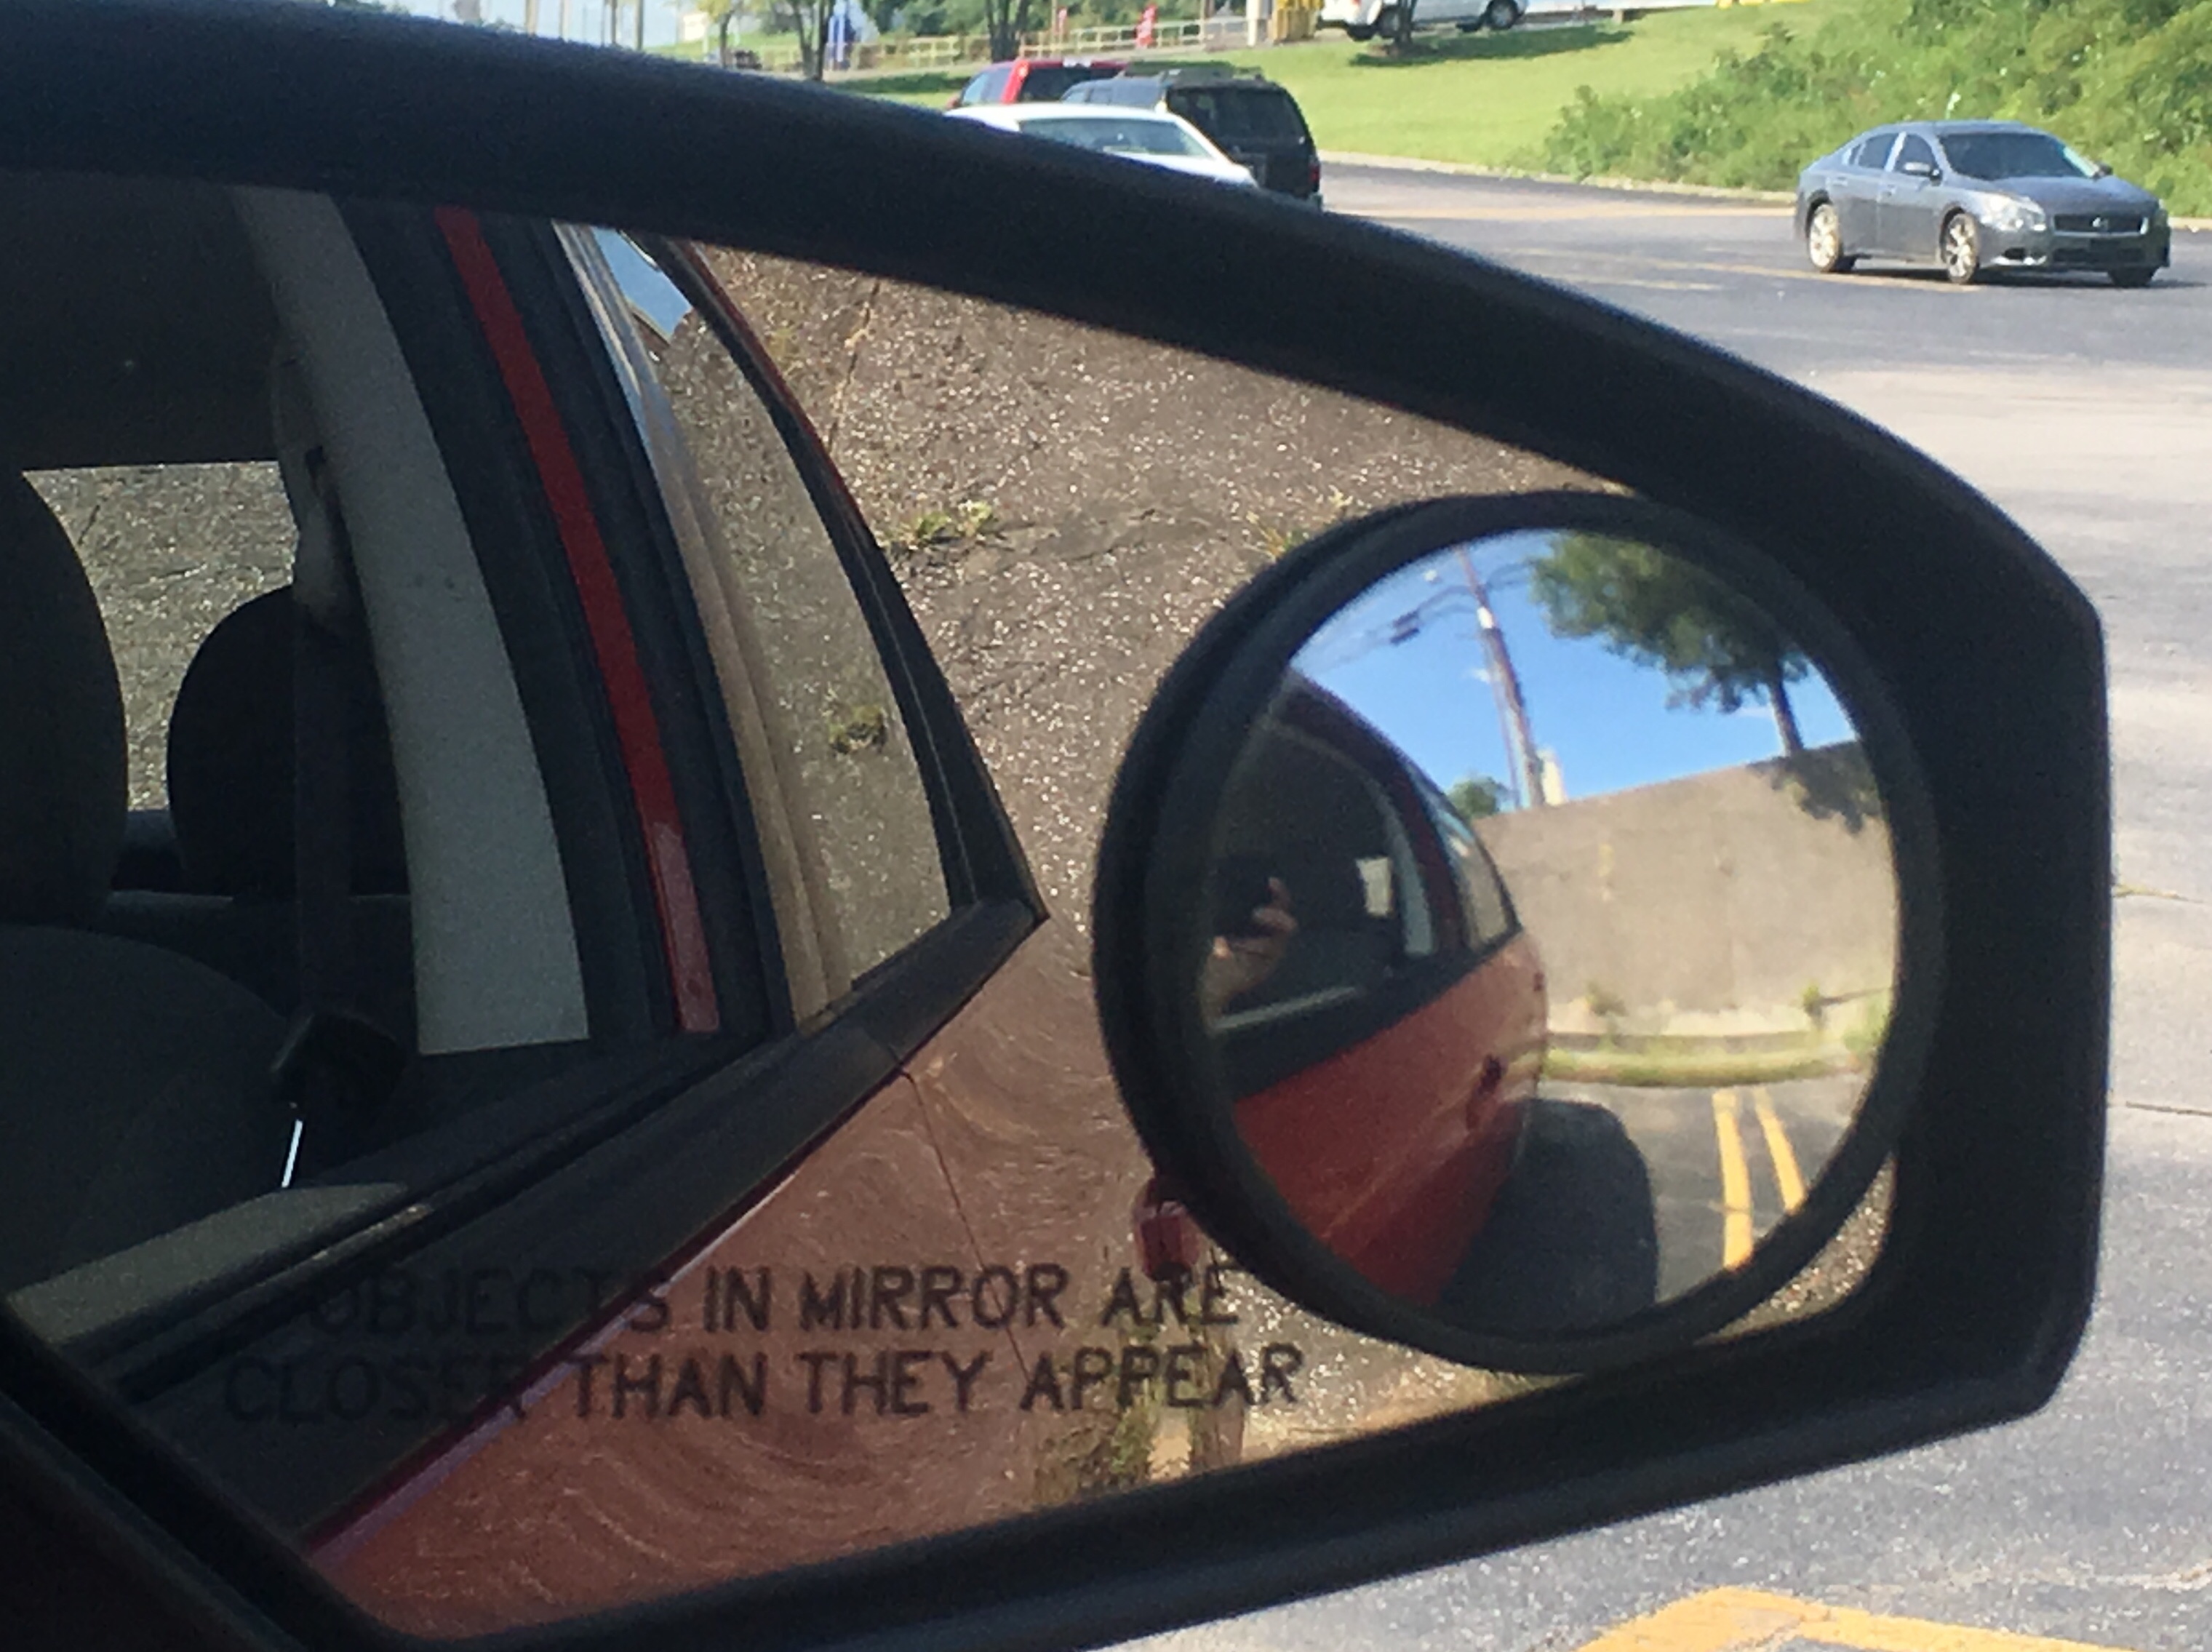 The disclaimer "Objects in mirror are closer than they appear" is featured on passenger-side mirrors of vehicles manufactured in the United States, Canada, India, Korea, and Australia. These mirrors are convex, which means they distort the size of objects viewed in the mirror, and as such, distorts the perception of how close or far away objects are from the driver's car. However, this distortion allows for the reflection of a wider field of view on the side of the vehicle to help eliminate blind spots. 